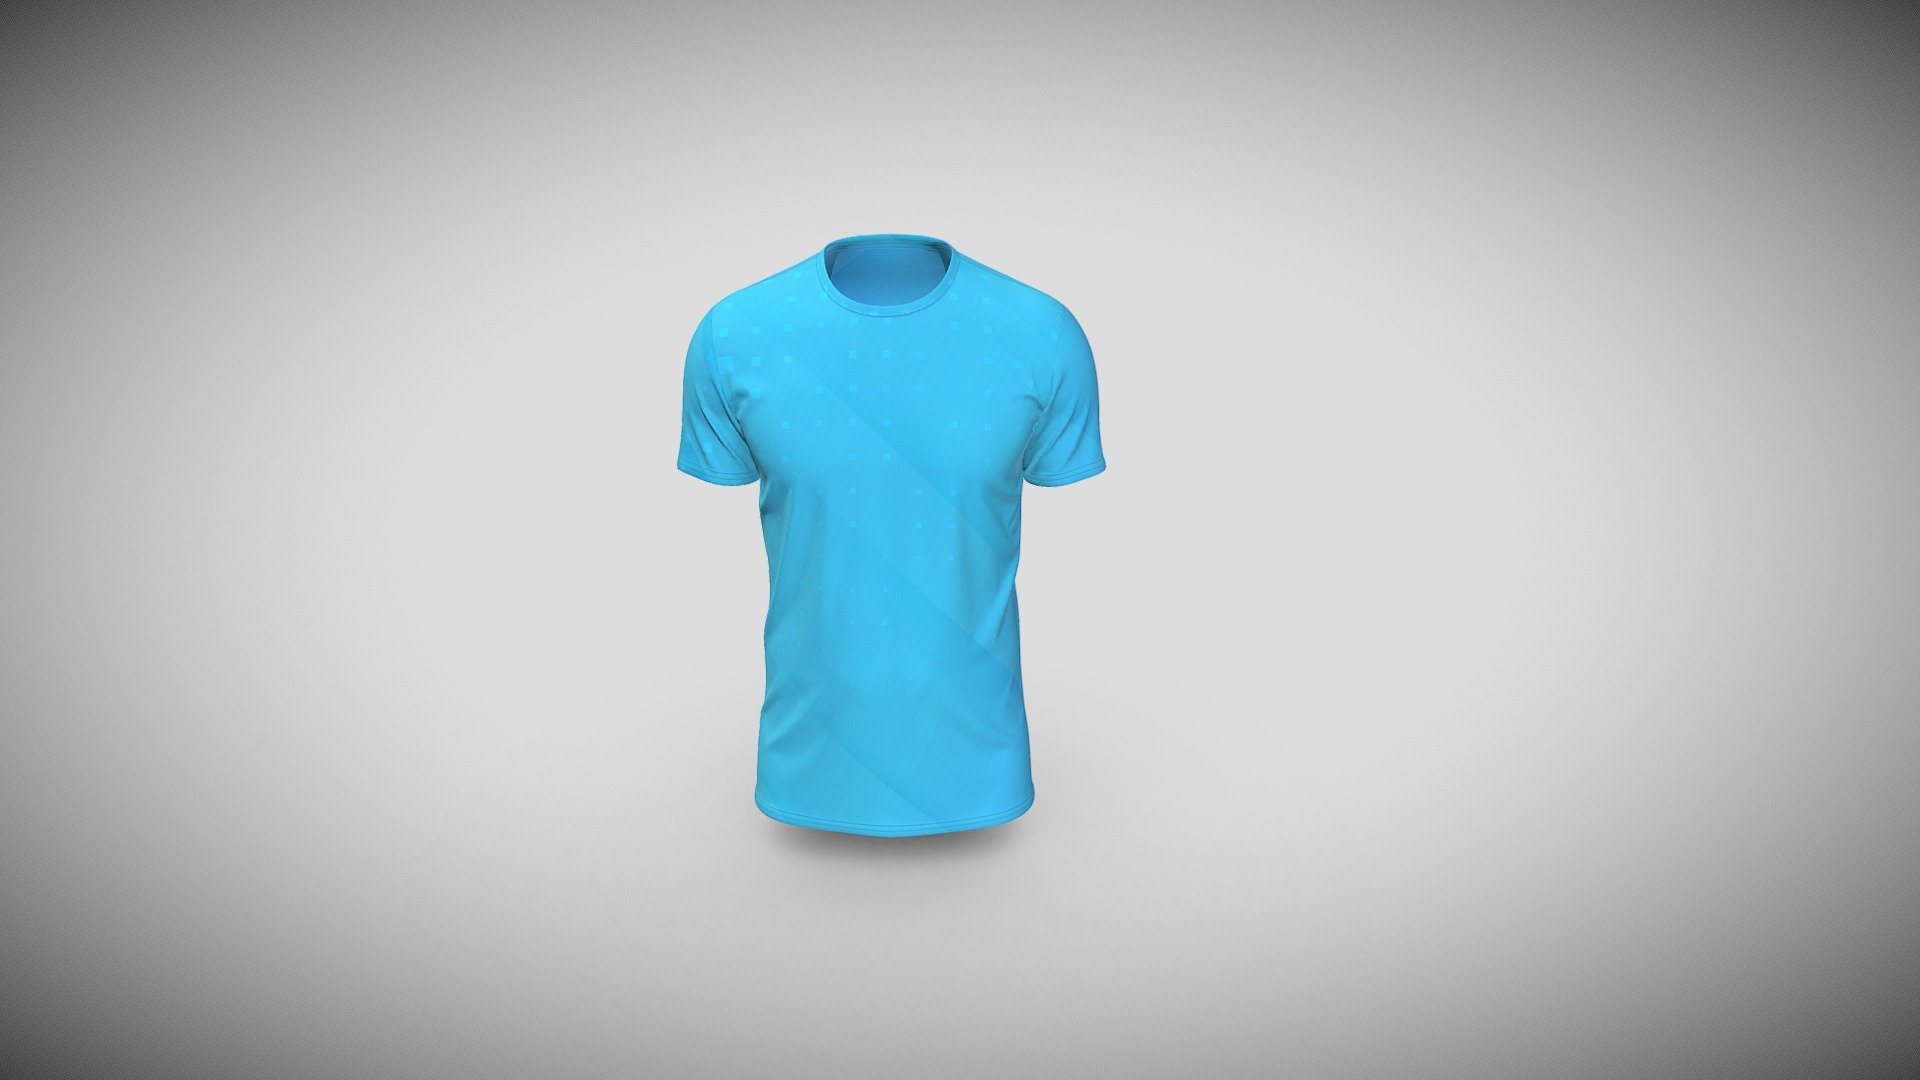 Cloth Title = Short Sleeve Casual T- Shirt 3D Apparel 

SKU = DG100053

Product Type = T-Shirt
 
Cloth Length = Regular
 
Body Fit = Slim Fit
 
Occasion = Casual

Sleeve Style = Set In Sleeve


Our Services:

3D Apparel Design.

OBJ,FBX,GLTF Making with High/Low Poly.

Fabric Digitalization.

Mockup making.

3D Teck Pack.

Pattern Making.

2D Illustration.

Cloth Animation and 360 Spin Video.


Contact us:- 

Email: info@digitalfashionwear.com 

Website: https://digitalfashionwear.com 

WhatsApp No: +8801759350445 


We designed all the types of cloth specially focused on product visualization, e-commerce, fitting, and production. 

We will design: 

T-shirts 

Polo shirts 

Hoodies 

Sweatshirt 

Jackets 

Shirts 

TankTops 

Trousers 

Bras 

Underwear 

Blazer 

Aprons 

Leggings 

and All Fashion items. 




Our goal is to make sure what we provide you, meets your demand 3d model